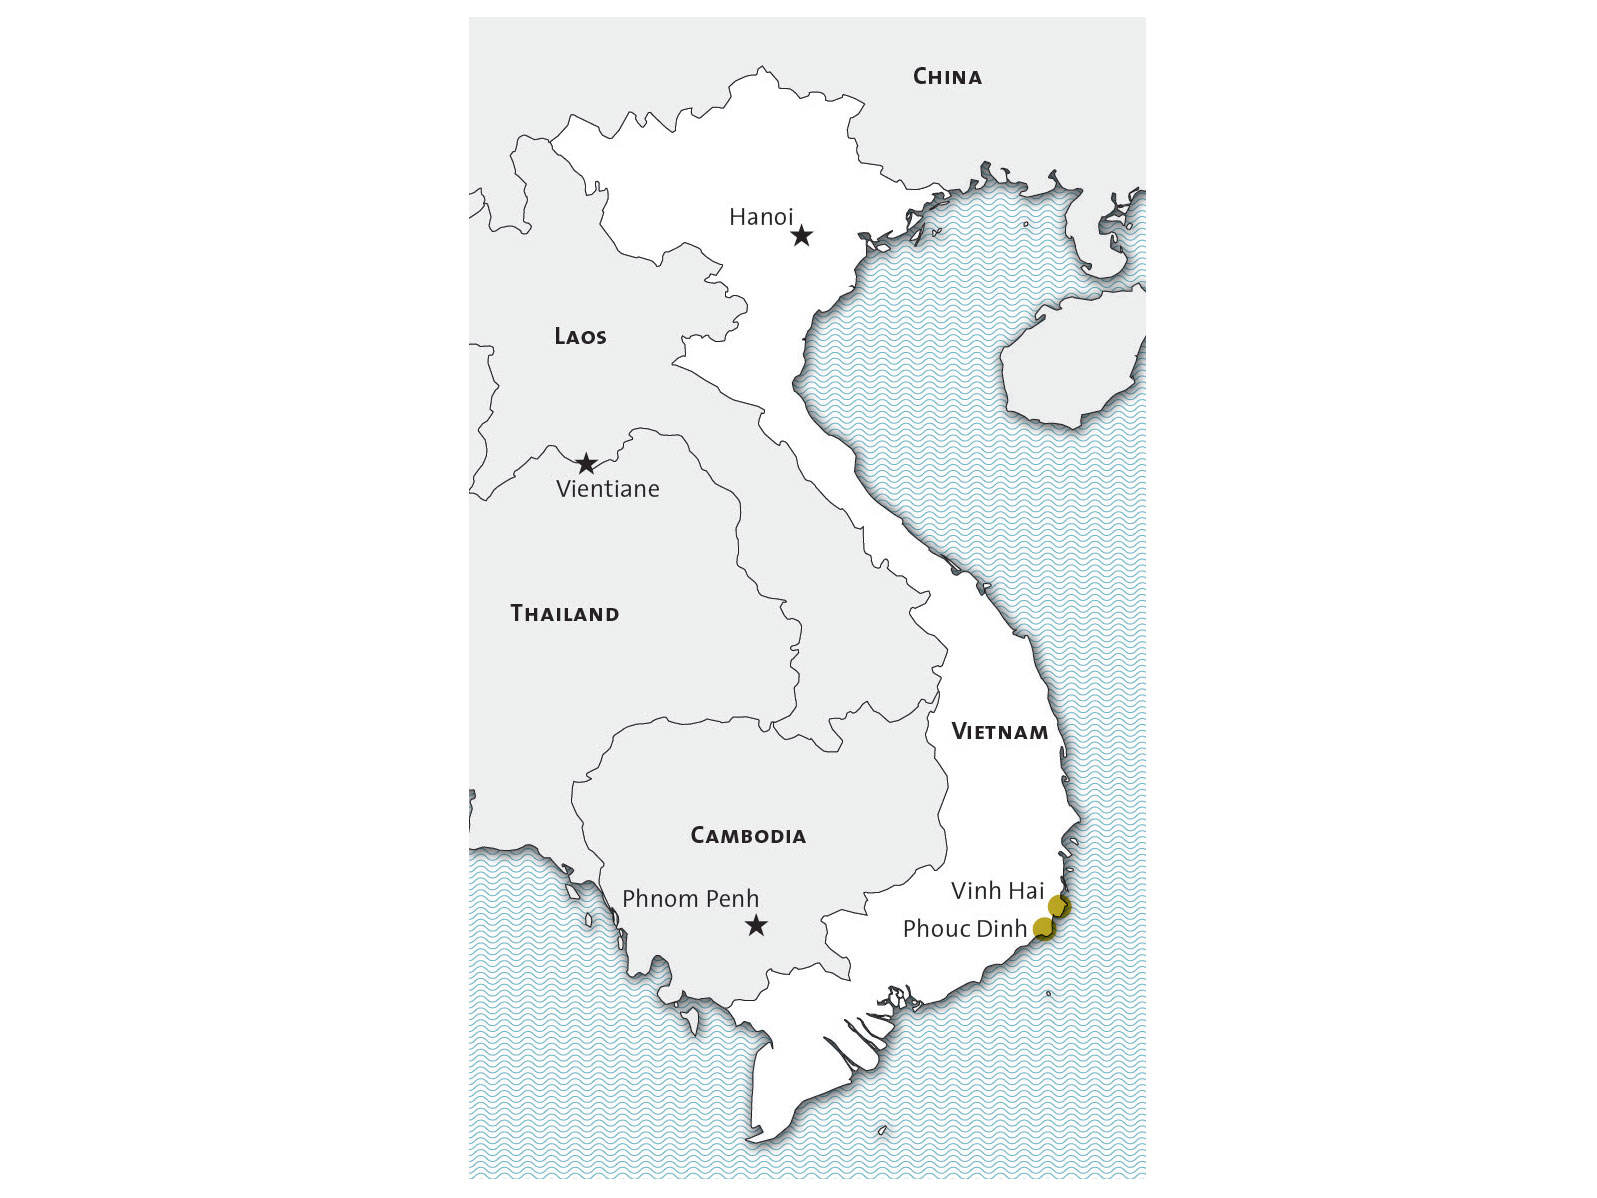 Enlarged view: A map showing the location of Vietnam's two nuclear reactors